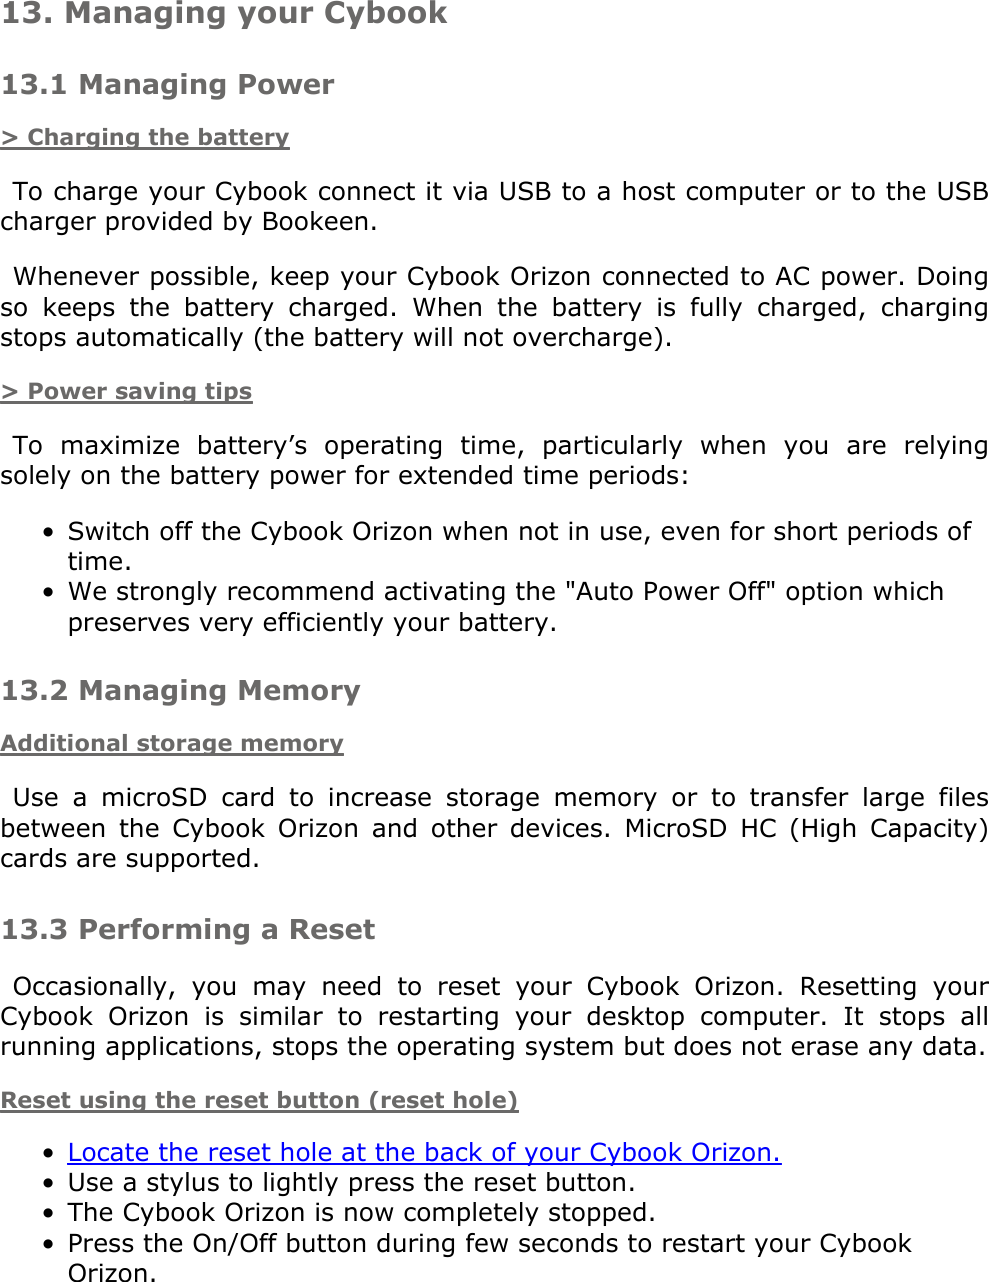 13. Managing your Cybook13.1 Managing Power&gt; Charging the batteryTo charge your Cybook connect it via USB to a host computer or to the USB charger provided by Bookeen.Whenever possible, keep your Cybook Orizon connected to AC power. Doing so  keeps  the  battery  charged.  When  the  battery  is  fully  charged,  charging stops automatically (the battery will not overcharge).&gt; Power saving tipsTo  maximize  battery’s  operating  time,  particularly  when  you  are  relying solely on the battery power for extended time periods:Switch off the Cybook Orizon when not in use, even for short periods of time.•We strongly recommend activating the &quot;Auto Power Off&quot; option which preserves very efficiently your battery.•13.2 Managing MemoryAdditional storage memoryUse  a  microSD  card  to  increase  storage  memory  or  to  transfer  large  files between  the  Cybook  Orizon  and  other  devices.  MicroSD  HC  (High  Capacity) cards are supported.13.3 Performing a ResetOccasionally,  you  may  need  to  reset  your  Cybook  Orizon.  Resetting  your Cybook  Orizon  is  similar  to  restarting  your  desktop  computer.  It  stops  all running applications, stops the operating system but does not erase any data.Reset using the reset button (reset hole)Locate the reset hole at the back of your Cybook Orizon.•Use a stylus to lightly press the reset button.•The Cybook Orizon is now completely stopped.•Press the On/Off button during few seconds to restart your Cybook Orizon.•